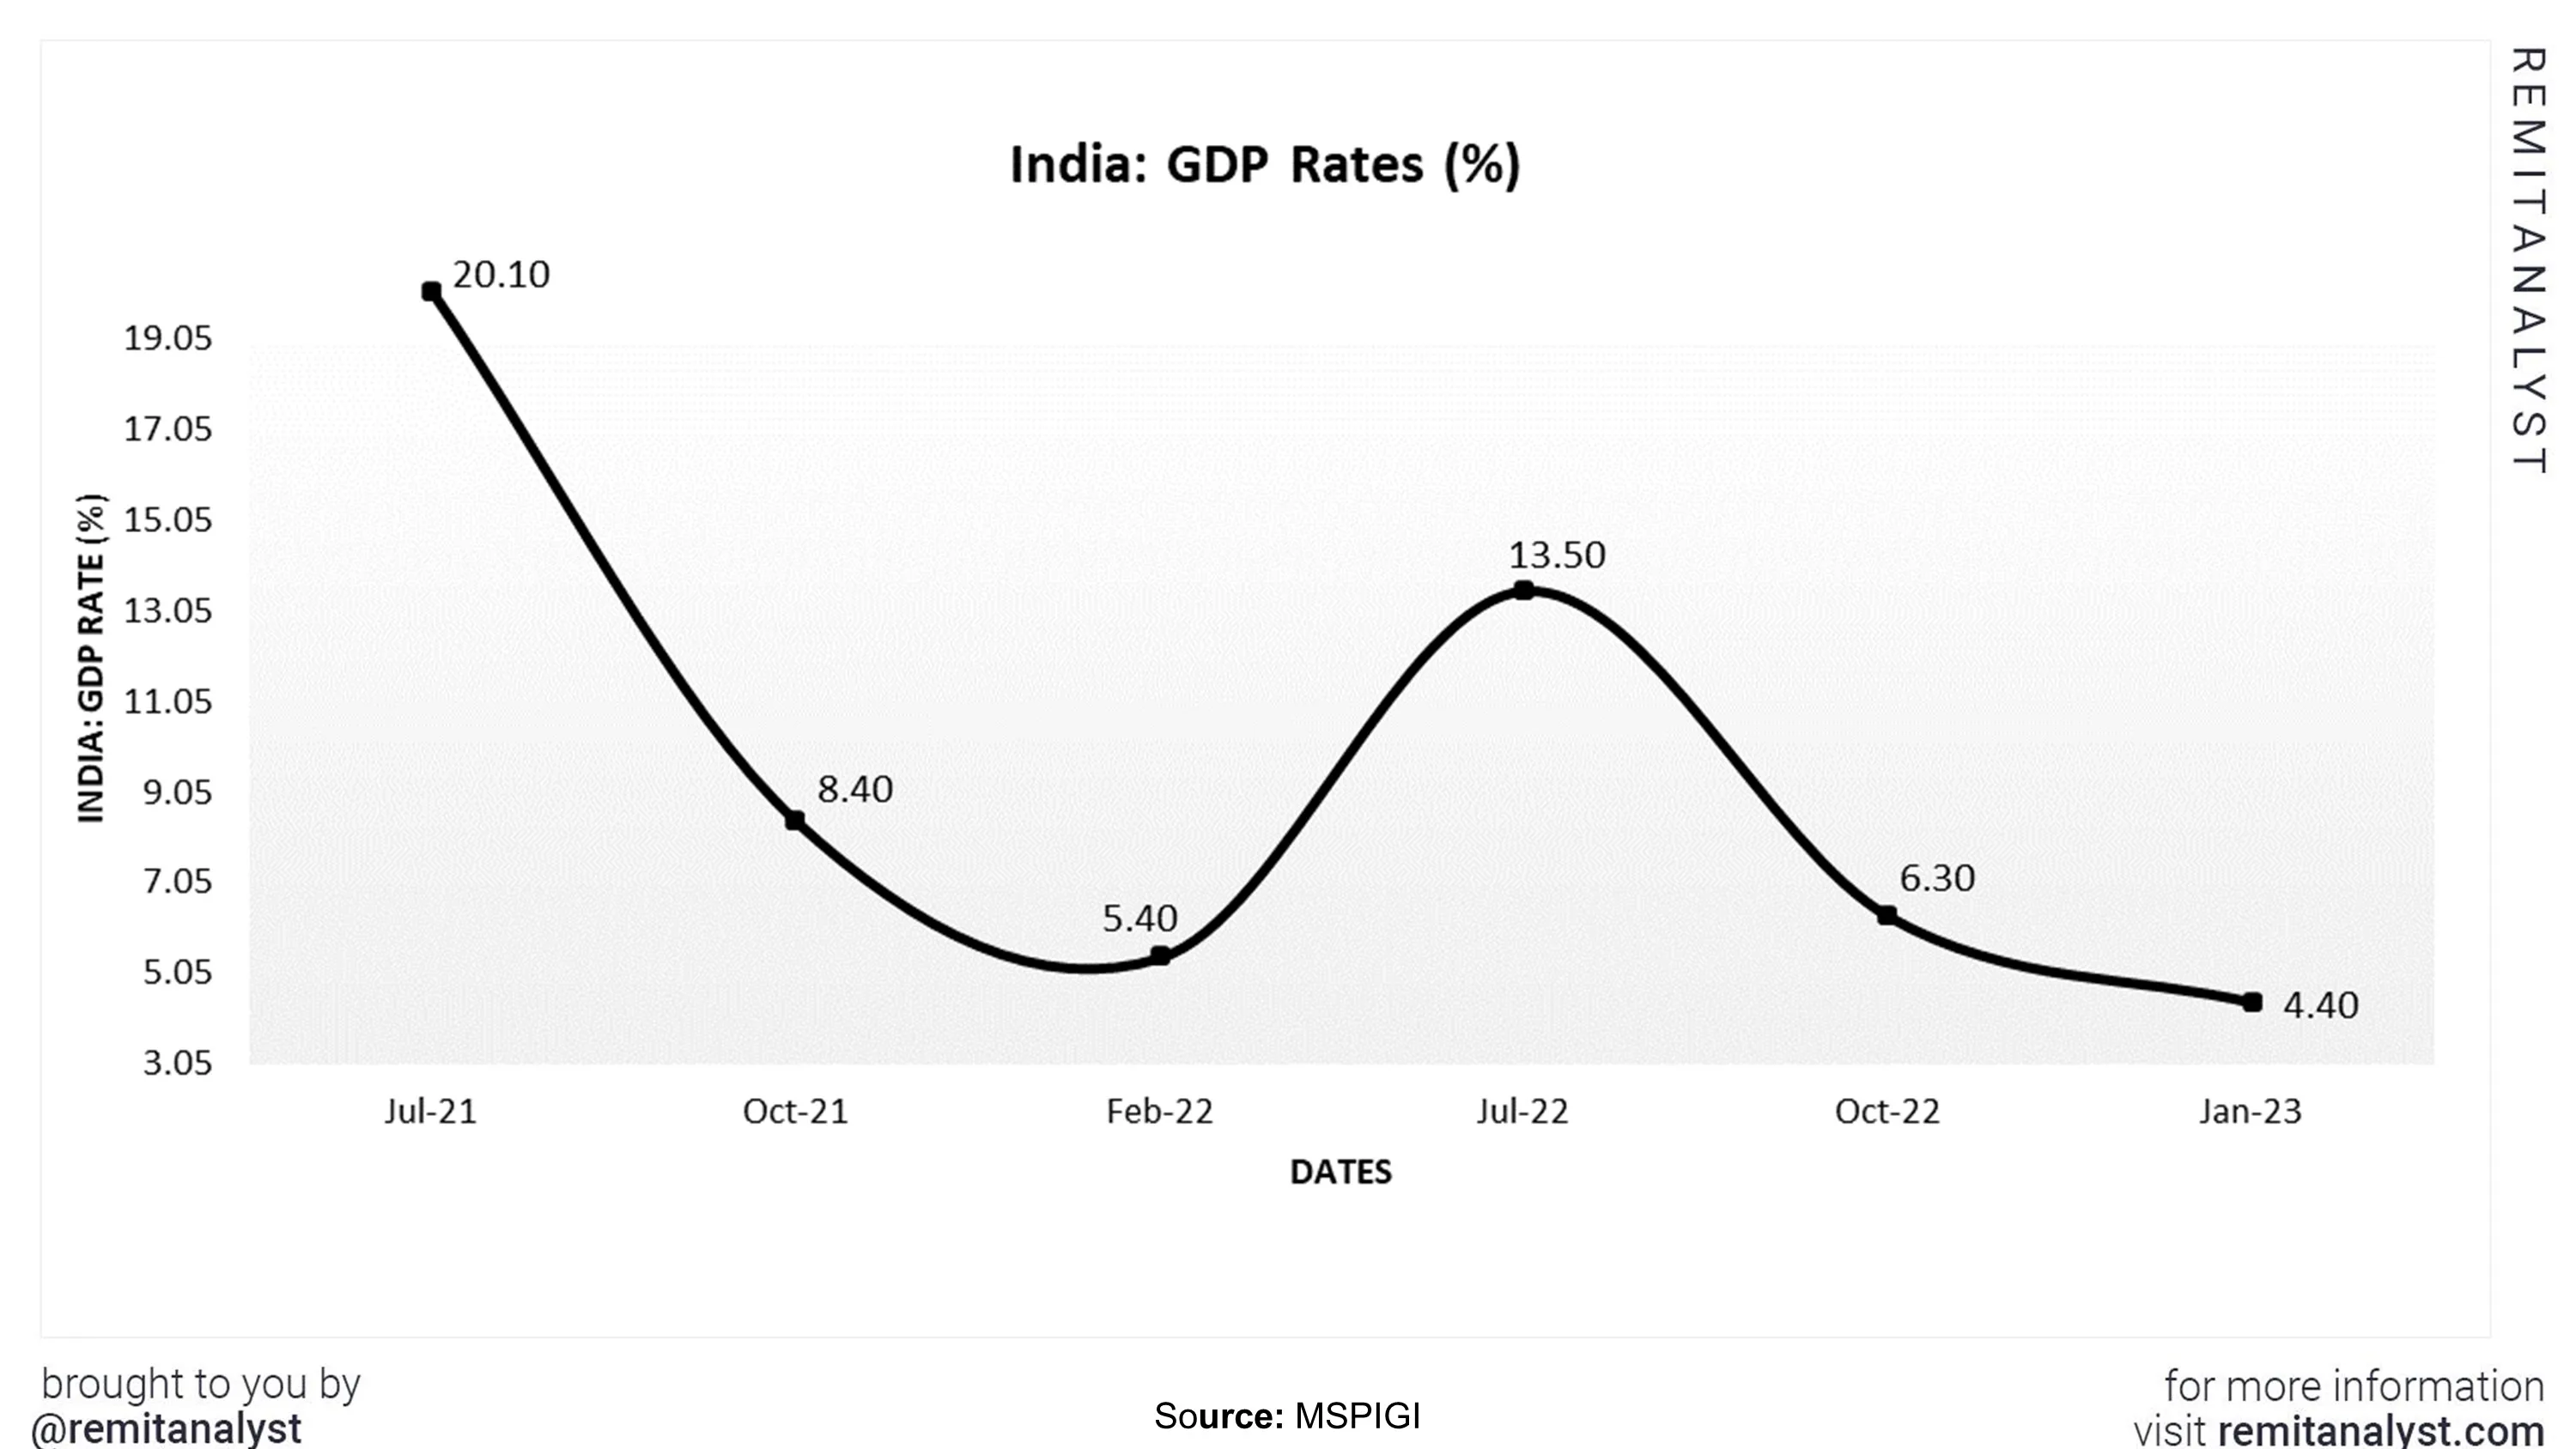 india-gdp-rate-from-jul-2021-to-jan-2023